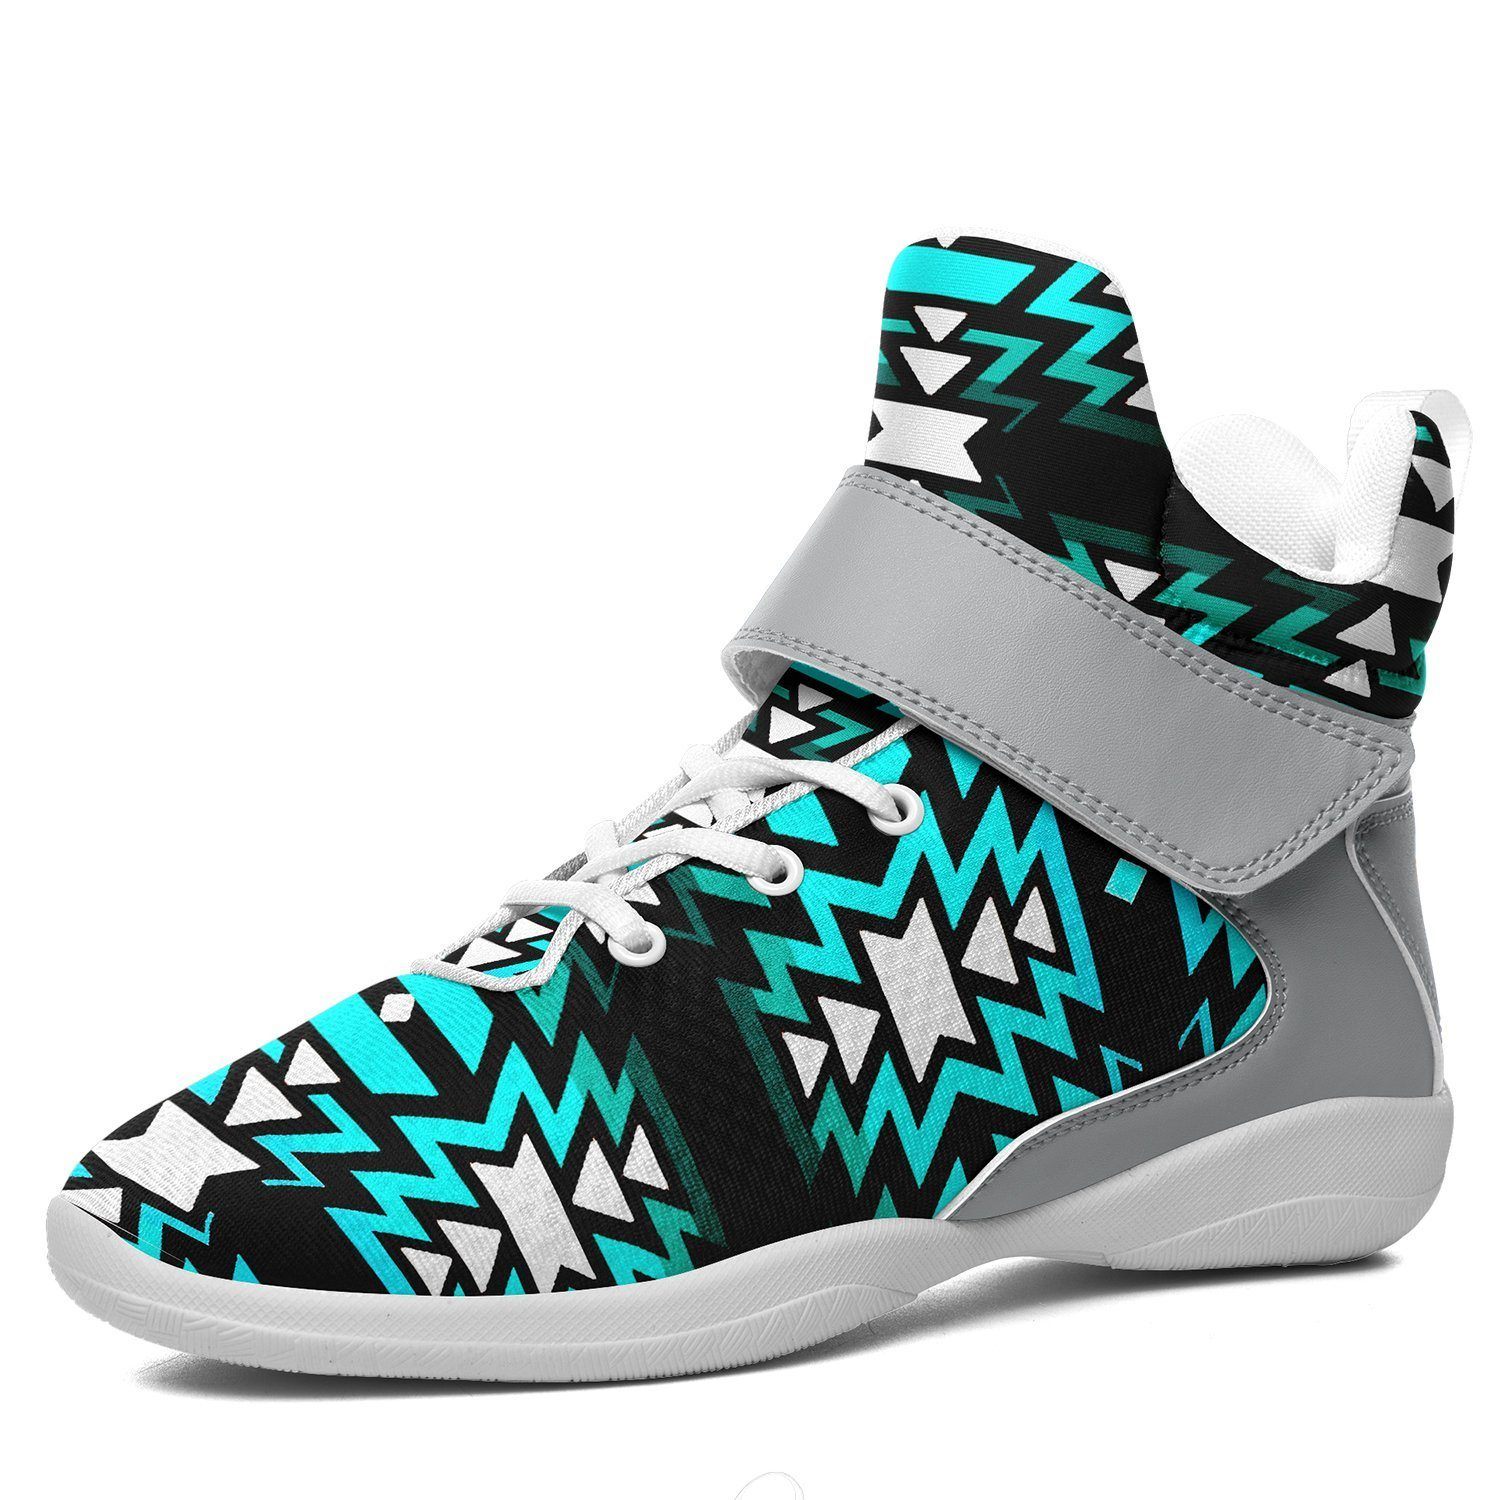 Black Fire Firefly Ipottaa Basketball / Sport High Top Shoes - White Sole 49 Dzine US Men 7 / EUR 40 White Sole with Gray Strap 